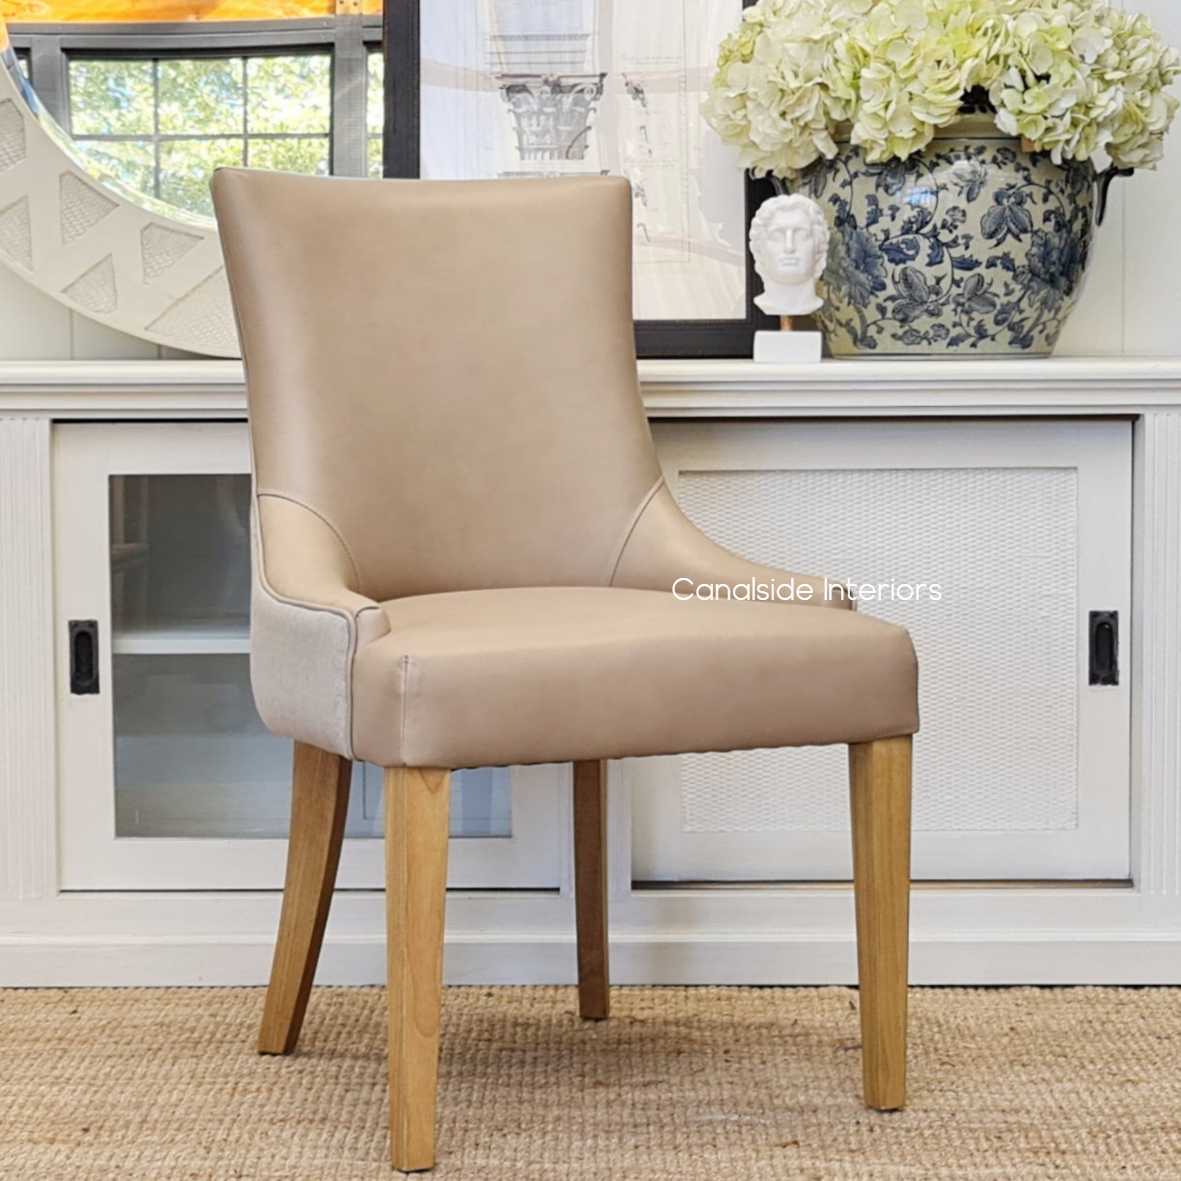 Aston Leather Linen Dining Chair natural legs base, CHAIRS, HAMPTONS Style, PLANTATION Style, CHAIRS Dining, kitchen, dining room, classic, timeless